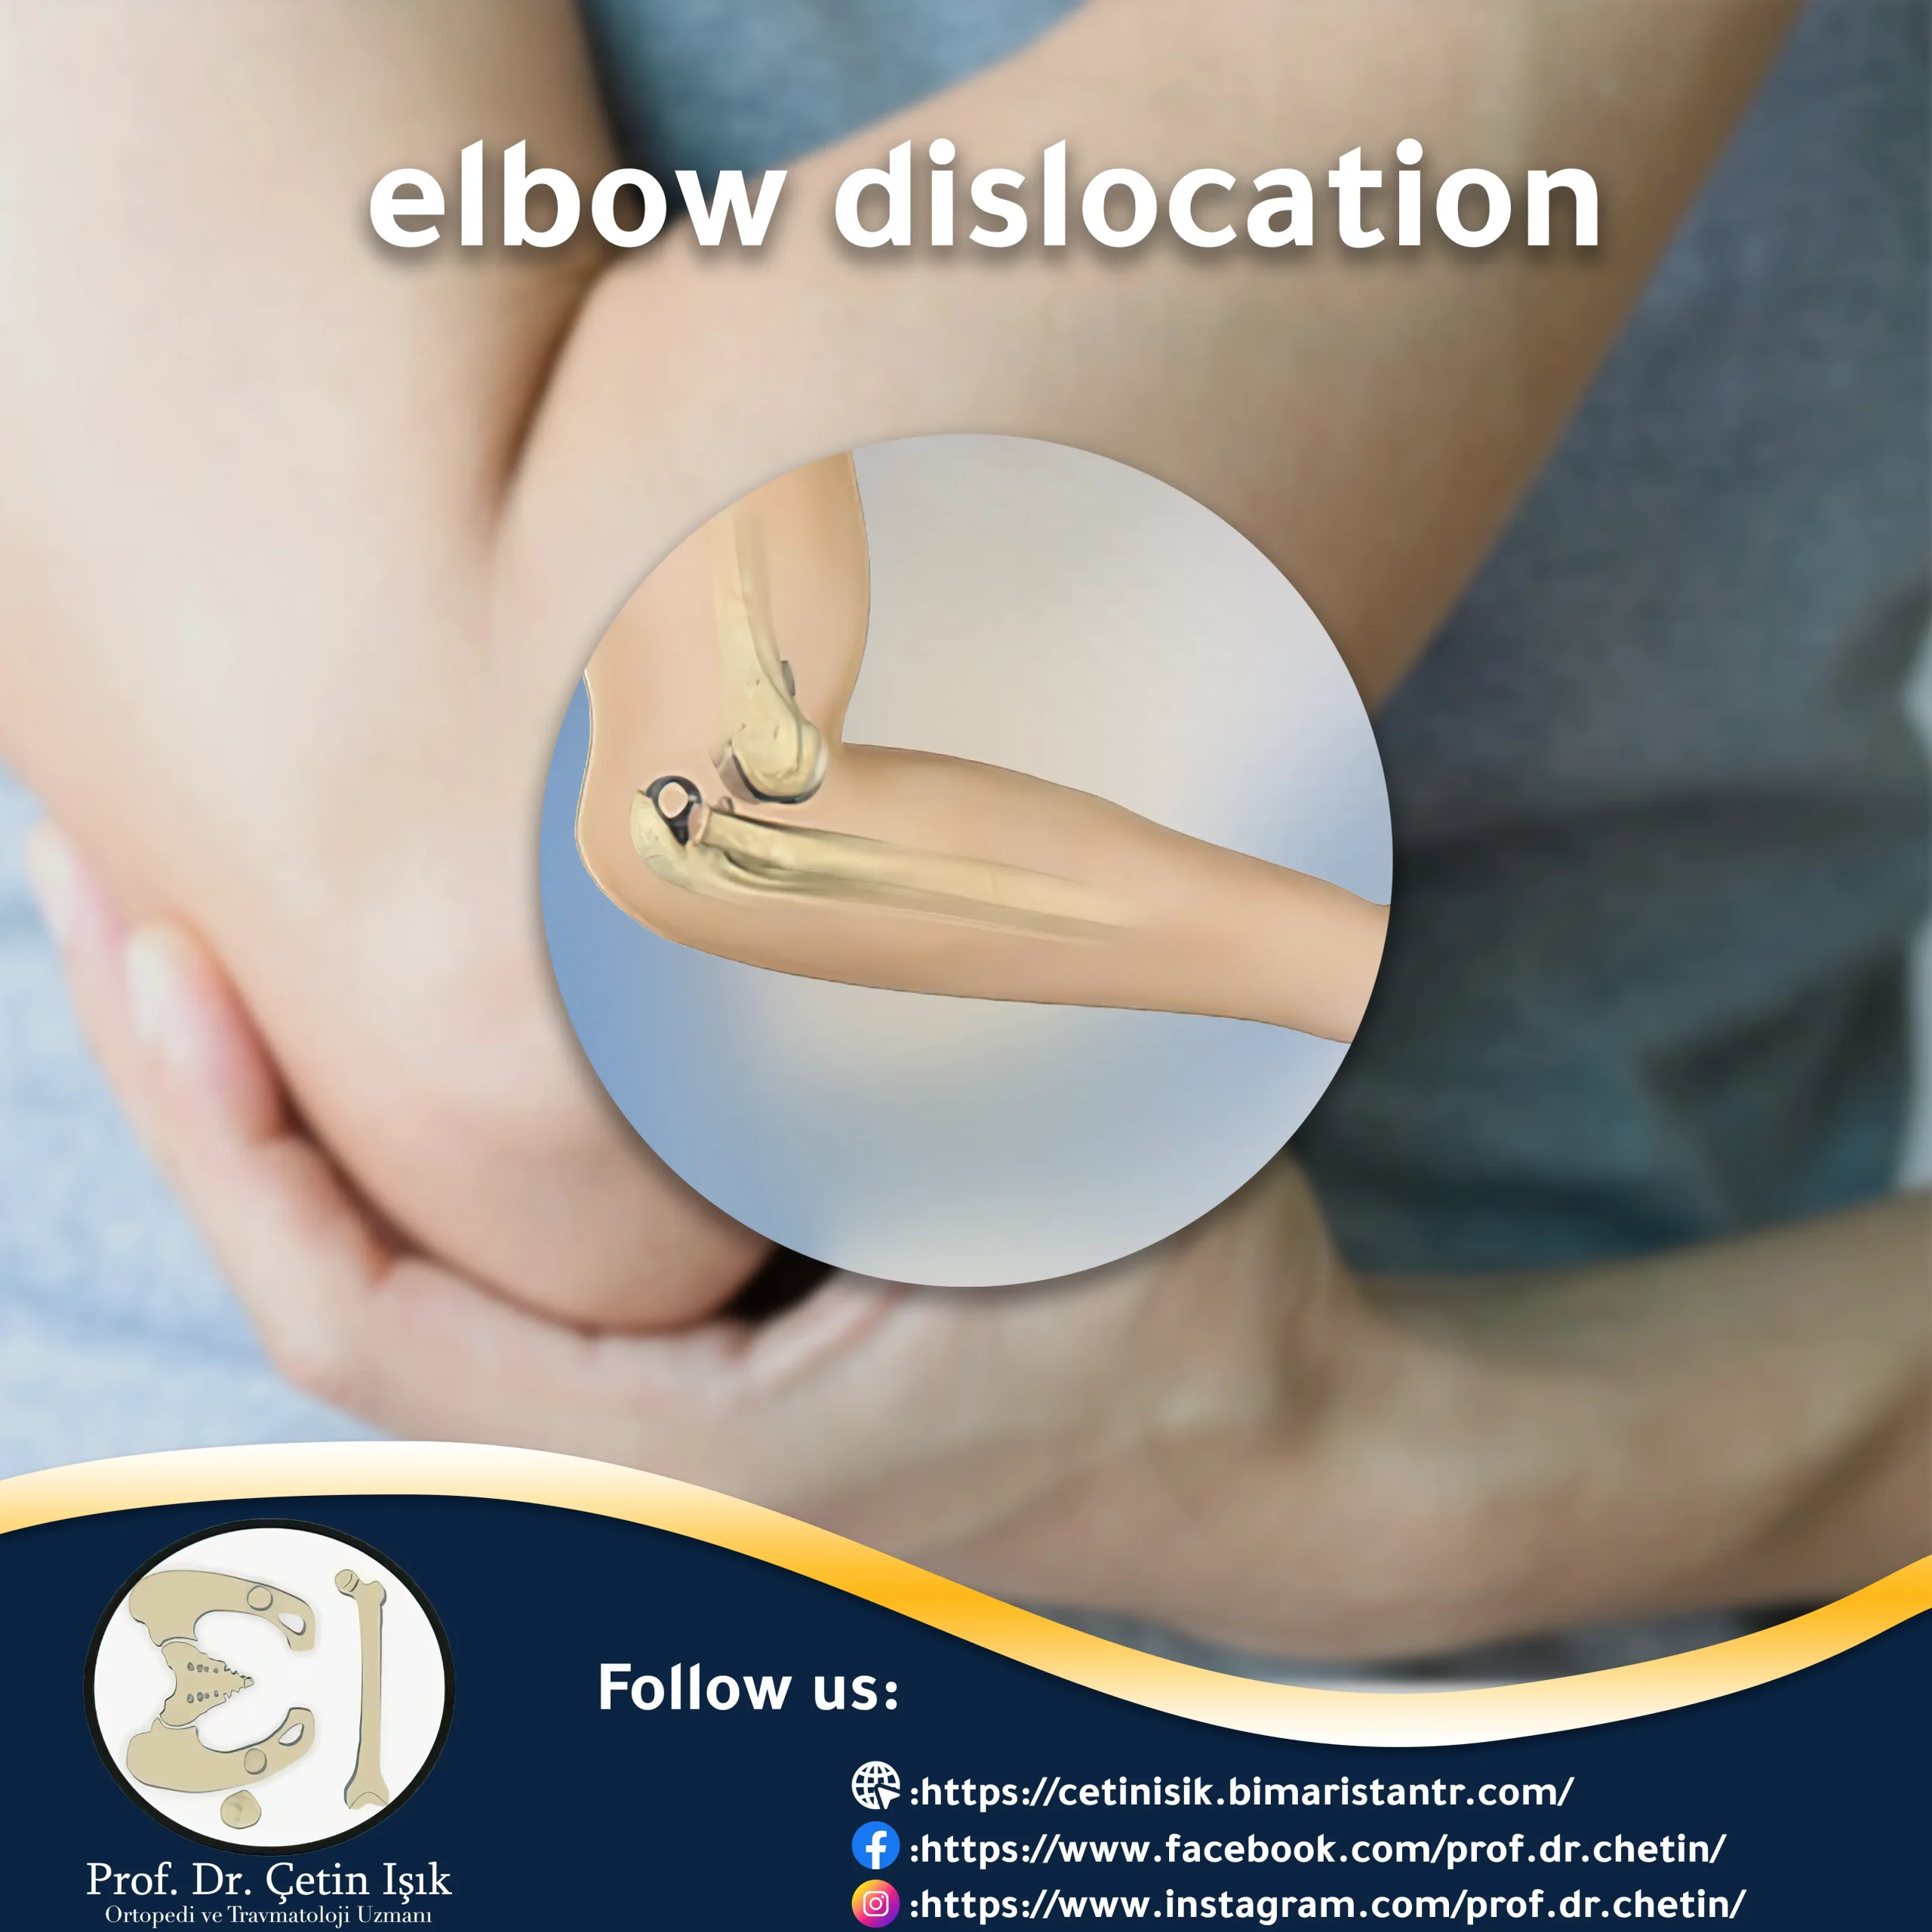 Cover image of the article "Elbow joint dislocation".